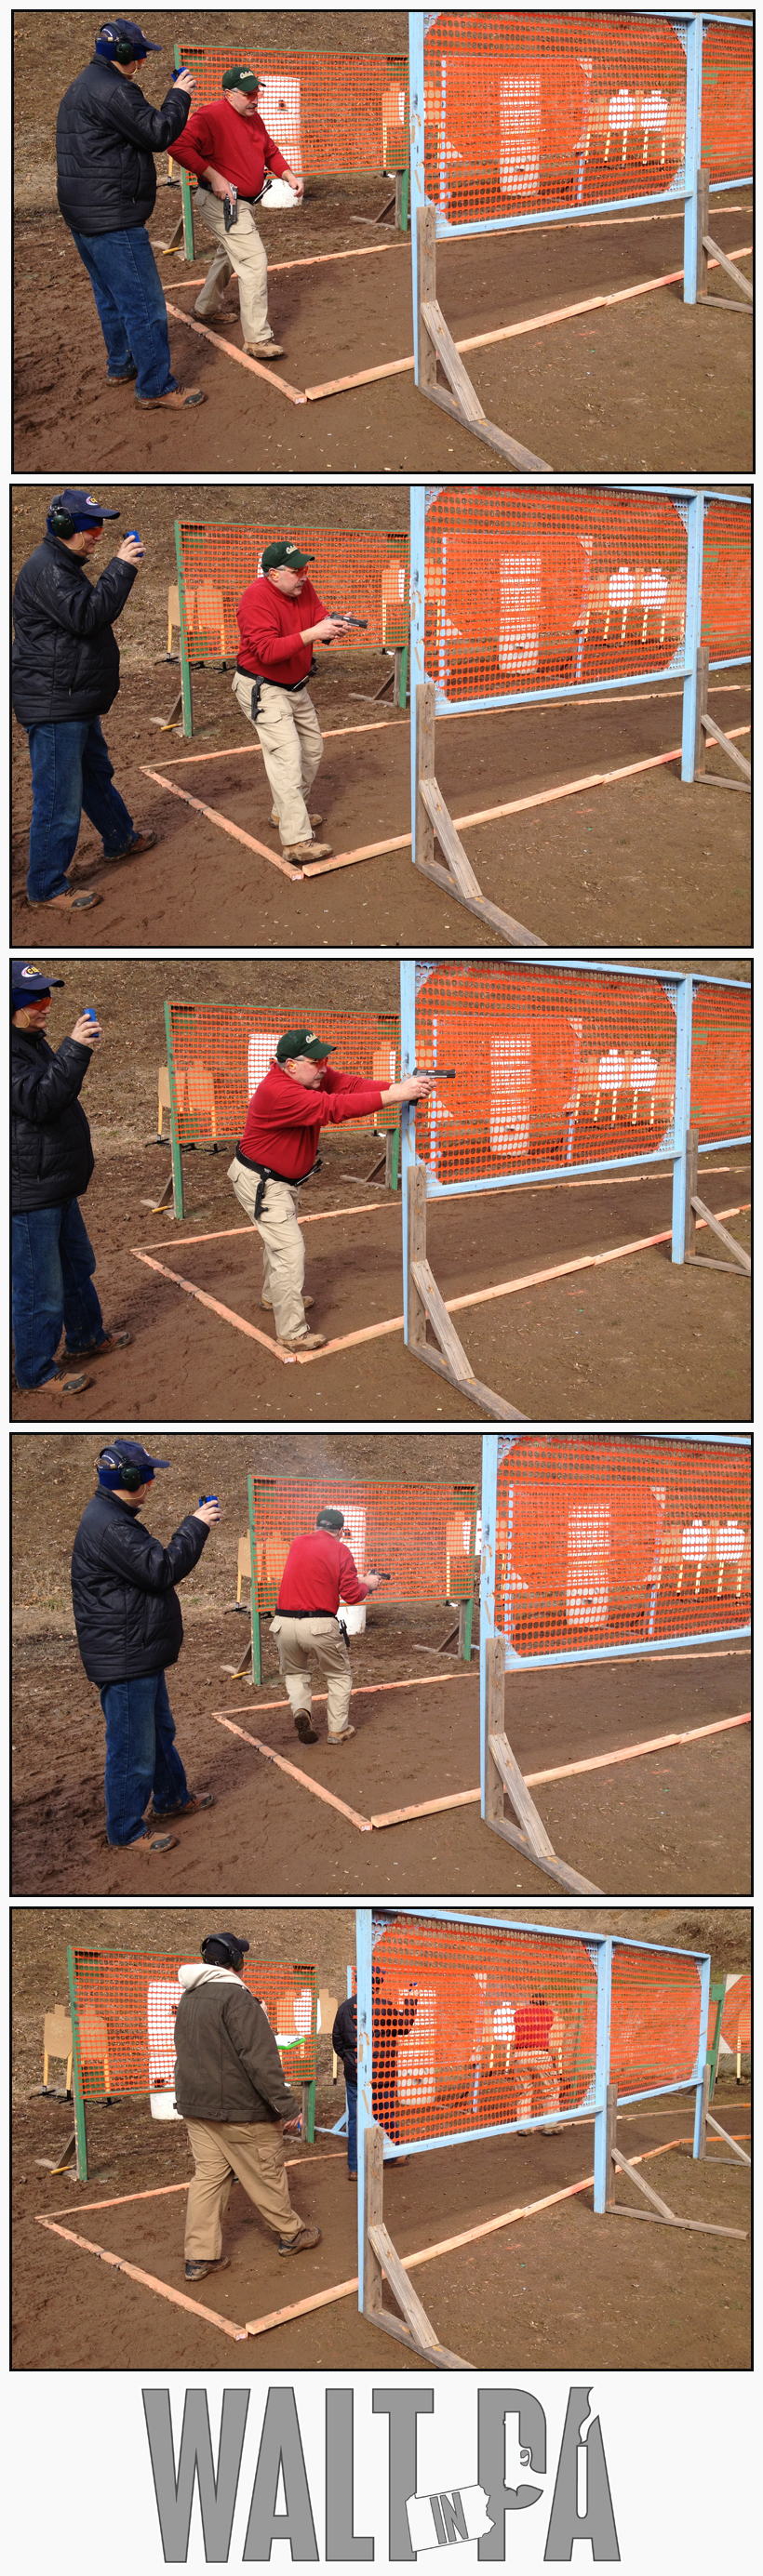 USPSA Shooters In Motion - Jim Graziano